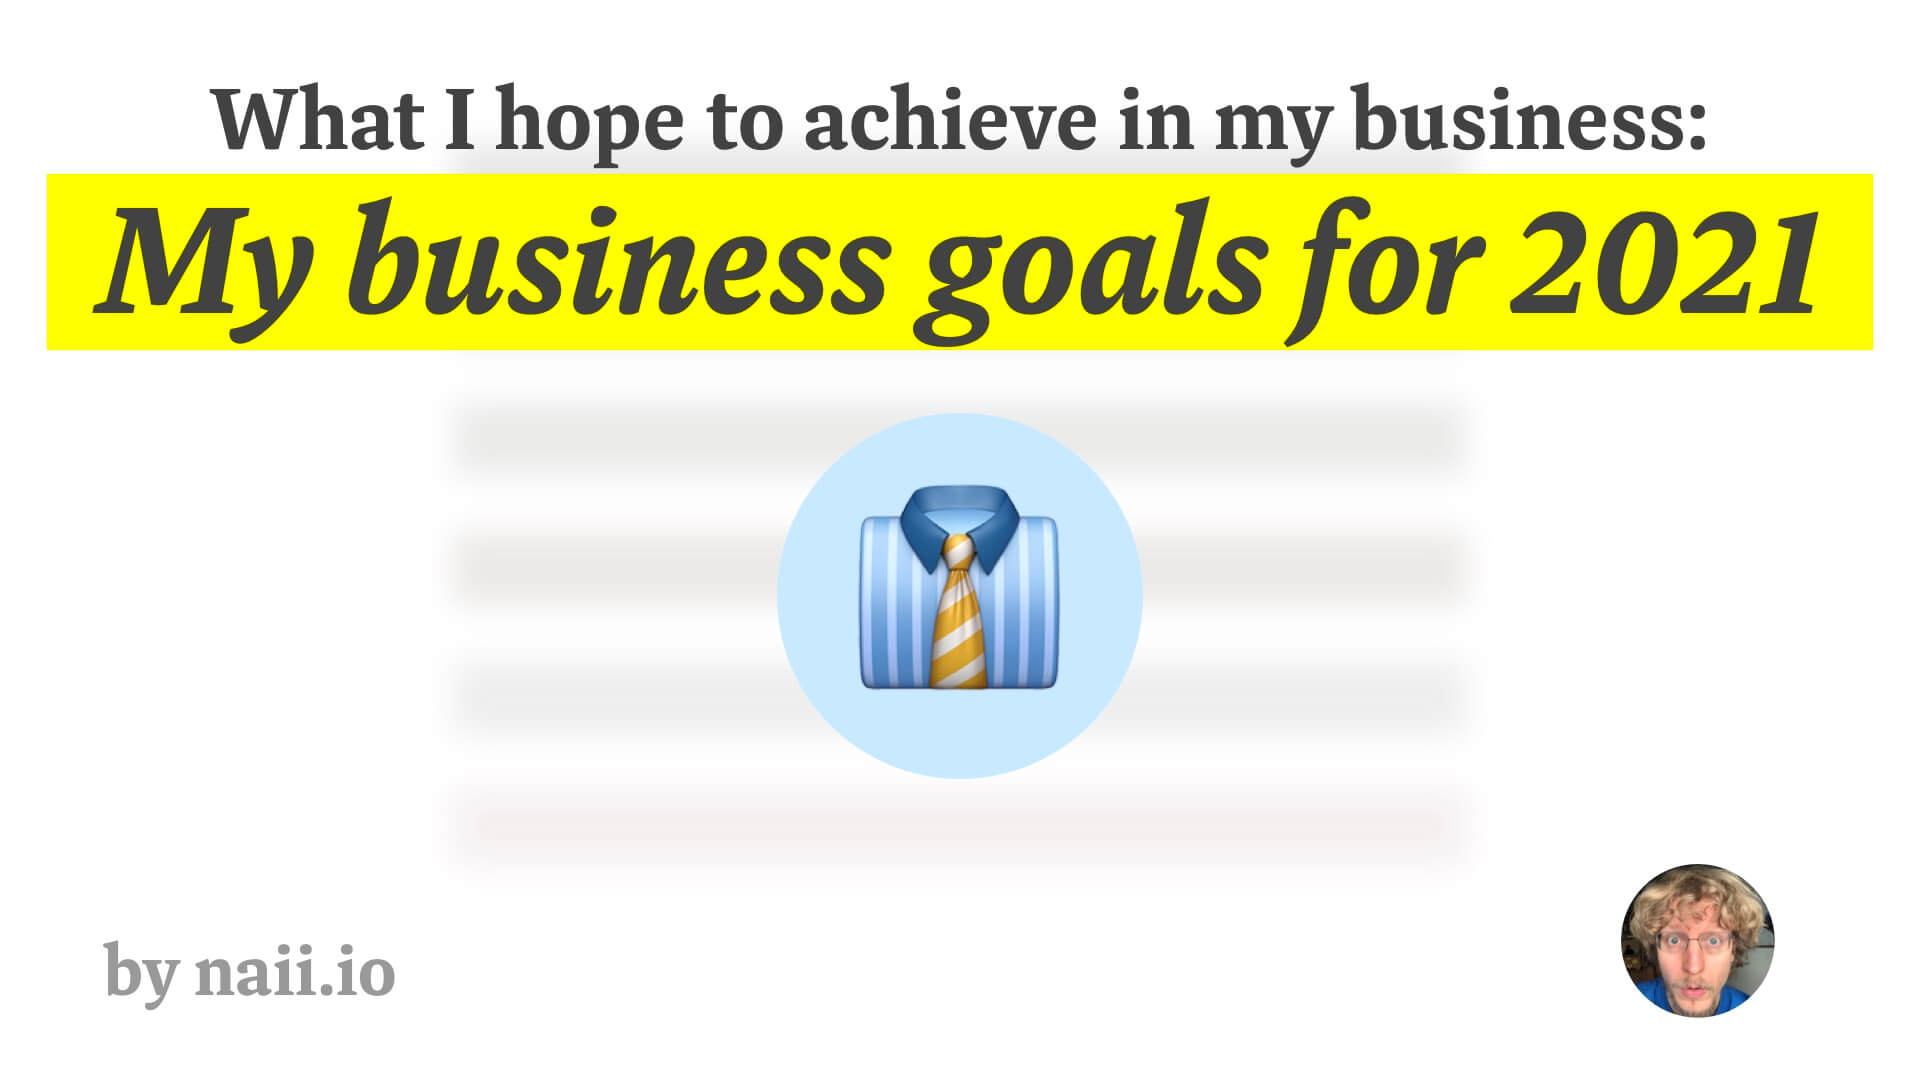 My business goals for 2021